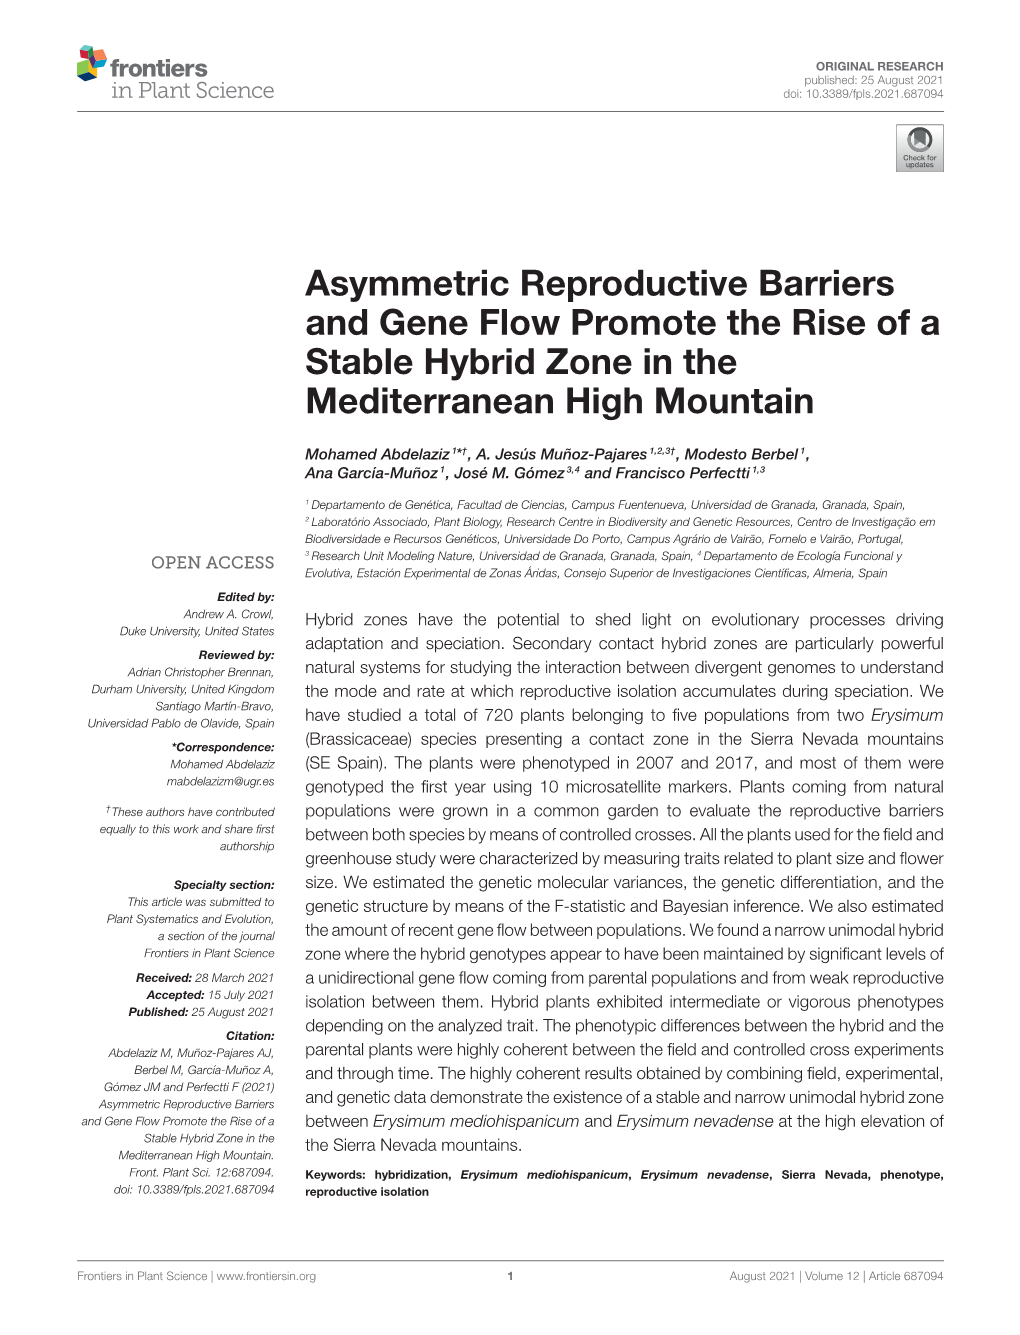 Asymmetric Reproductive Barriers and Gene Flow Promote the Rise of a Stable Hybrid Zone in the Mediterranean High Mountain